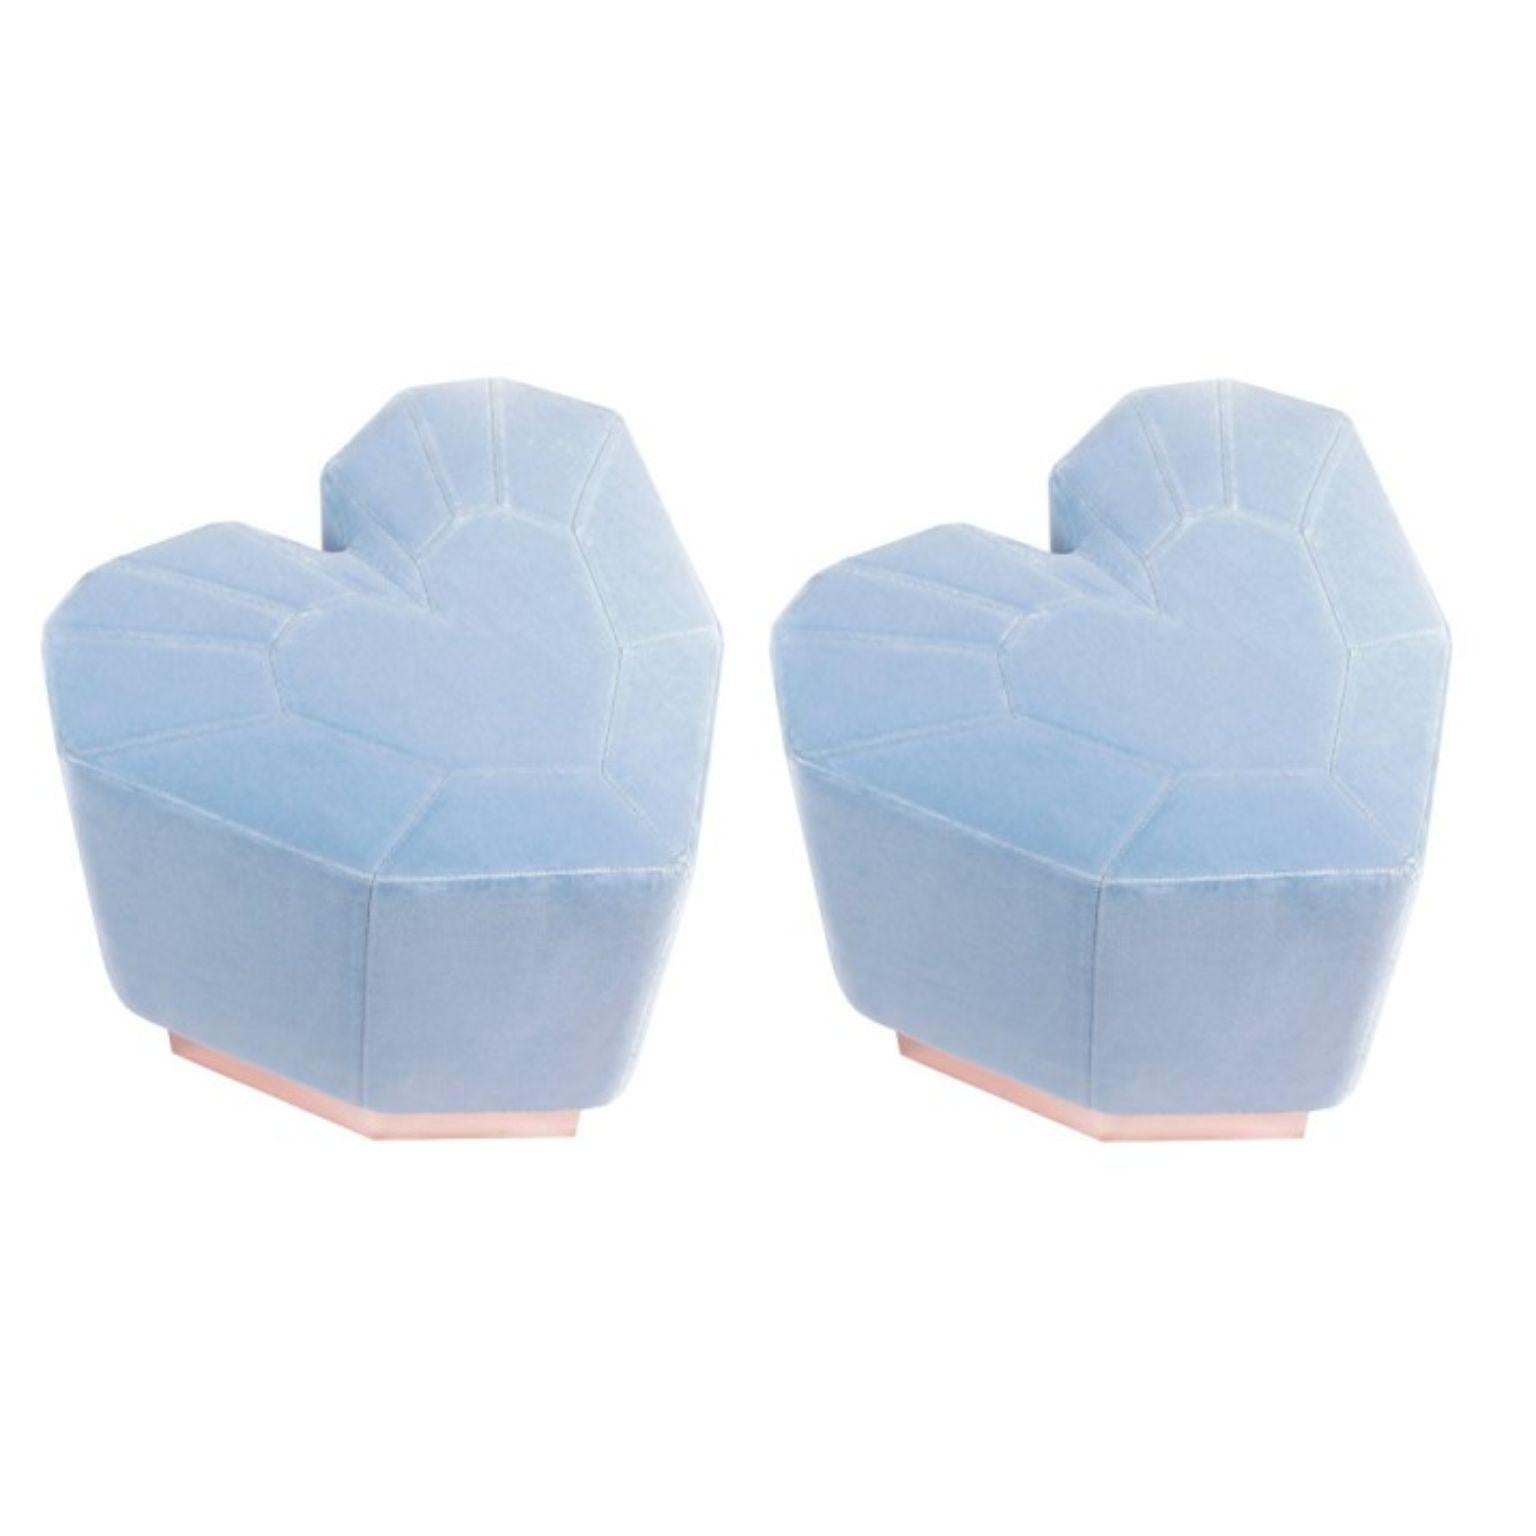 Set of 2 light blue queen heart stools by Royal Stranger
Dimensions: 46 x 49 x 43 cm 
Different upholstery colors and finishes are available. Brass, copper or stainless steel in polished or brushed finish.
Materials: Velvet heart shape upholstery